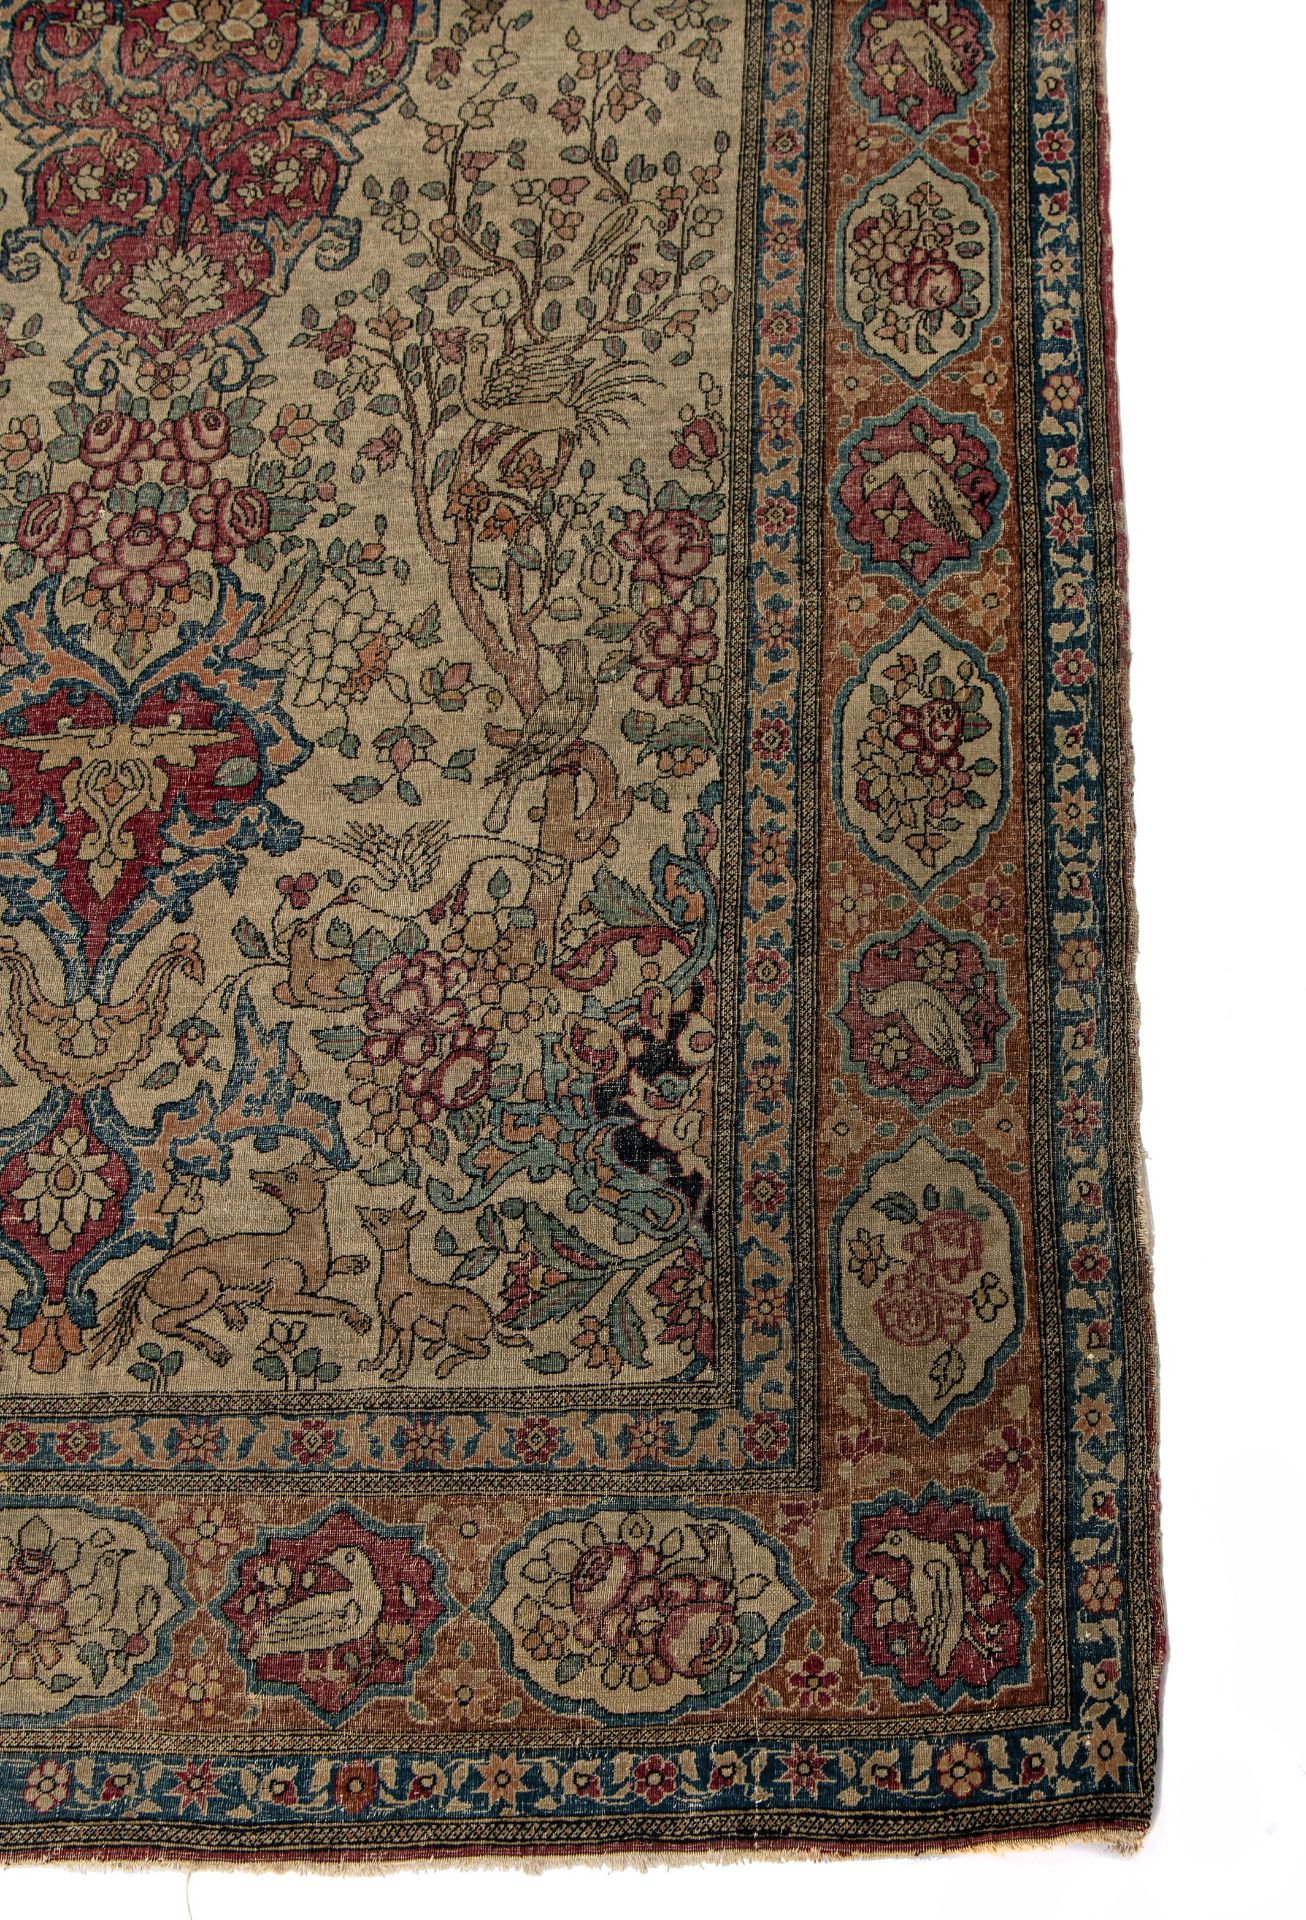 An antique Persian Ispahan rug, depicting the tree of life, 133 x 215 cm (+) - Image 5 of 9